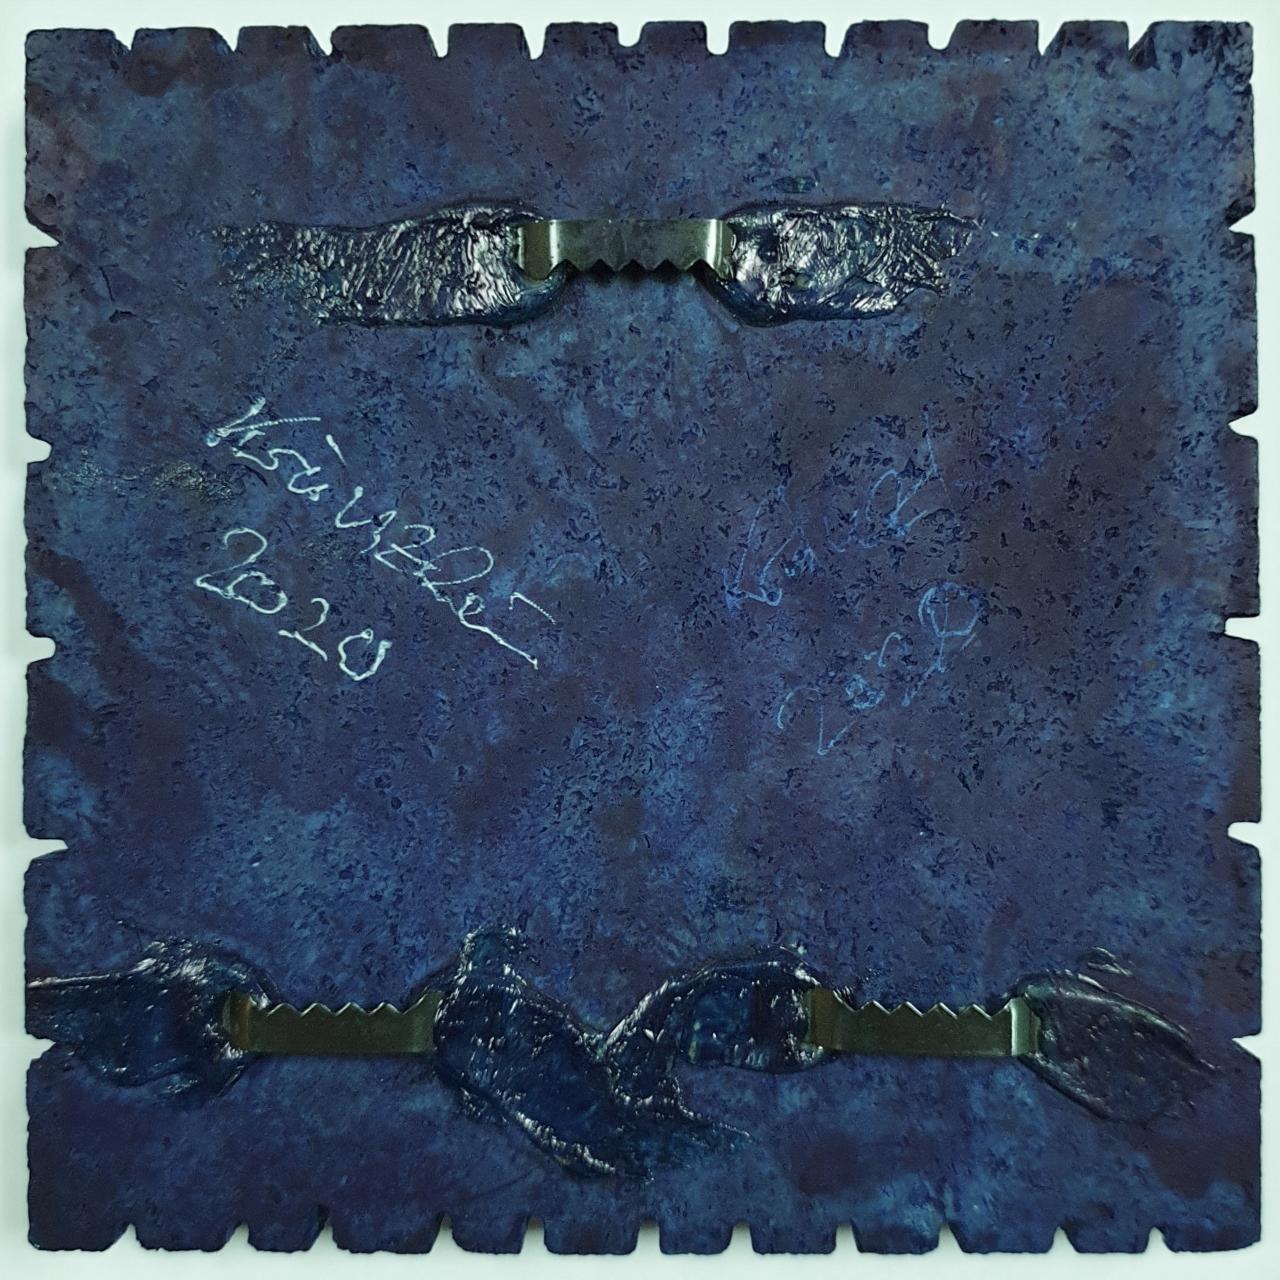 o.T. (Bl15Rc) is a unique small size contemporary modern wall sculpture painting relief by German artist Dieter Kränzlein. The relief is made from limestone and it is finished with a thin layer of blue ink that has penetrated into the limestone. Due